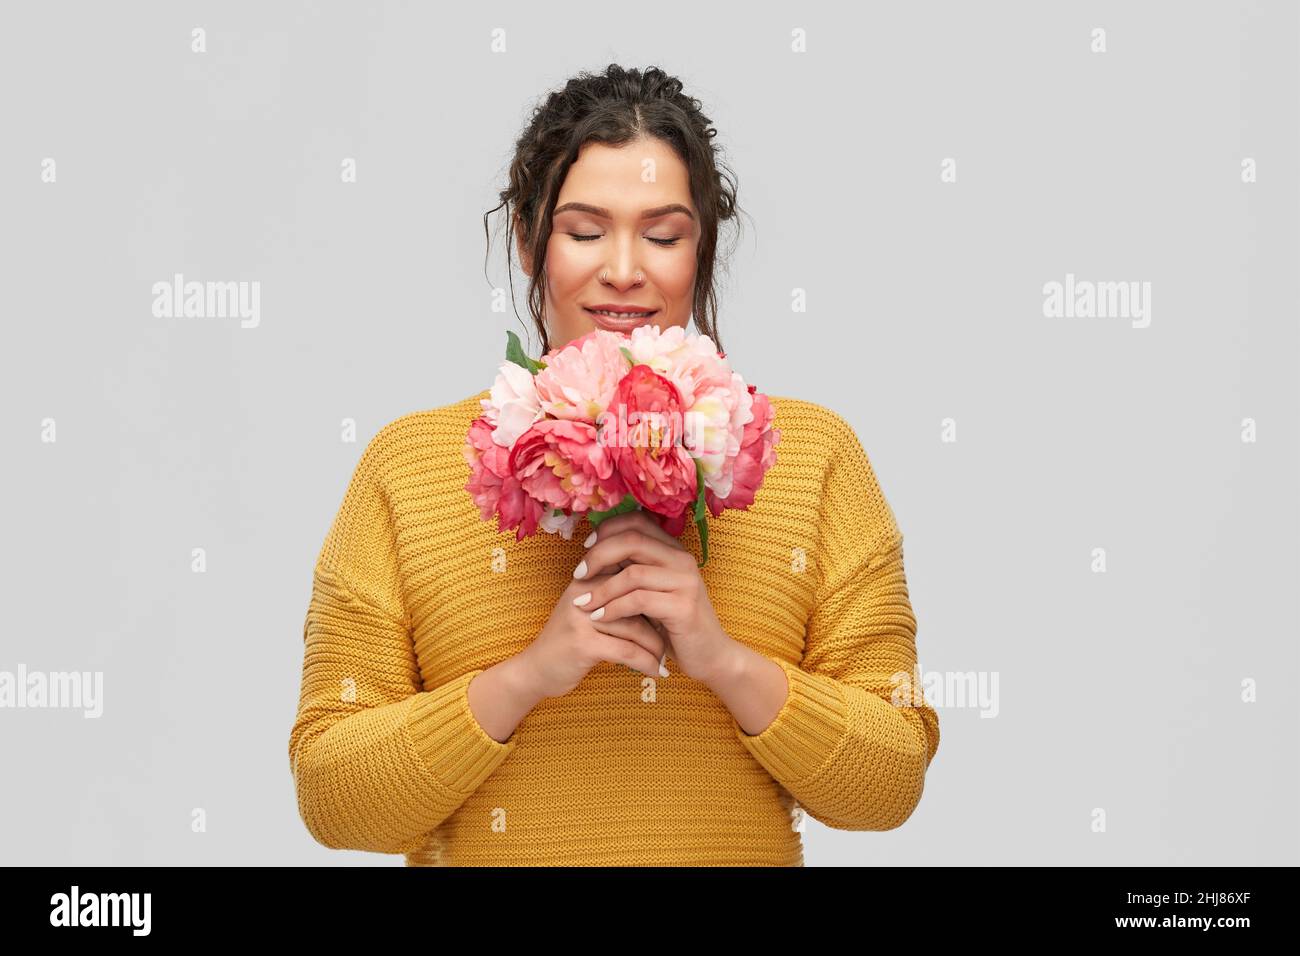 happy smiling young woman with bunch of flowers Stock Photo